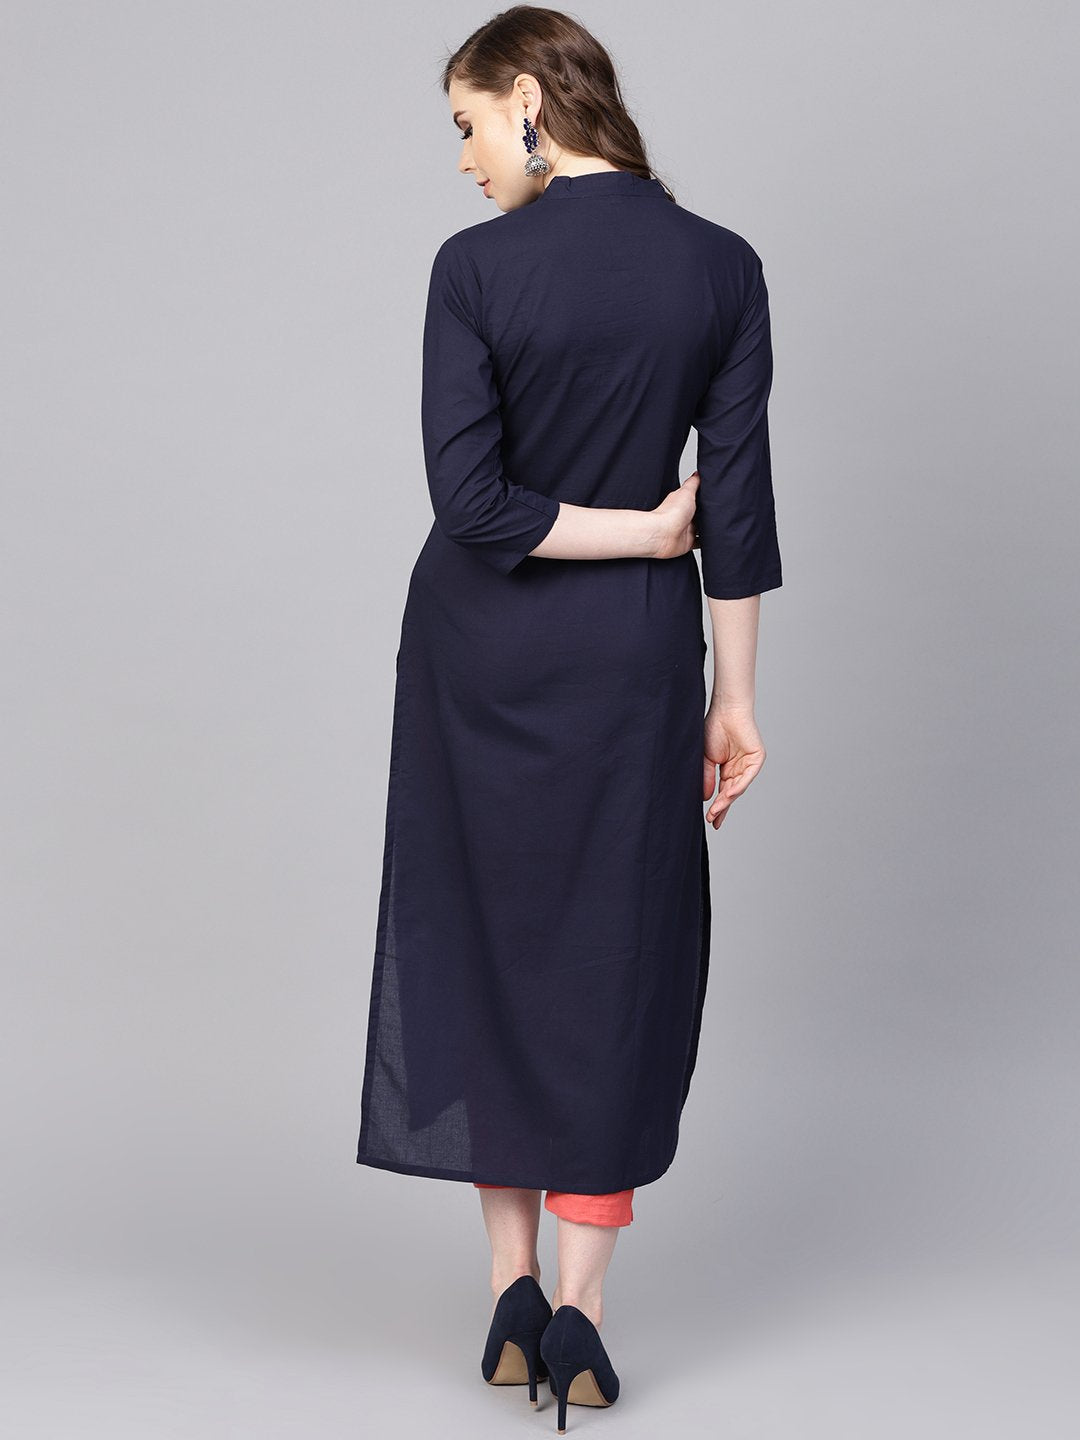 Women's Navy Blue Kurta With Contrasting Detailed Placket With Madarin Collar - Nayo Clothing